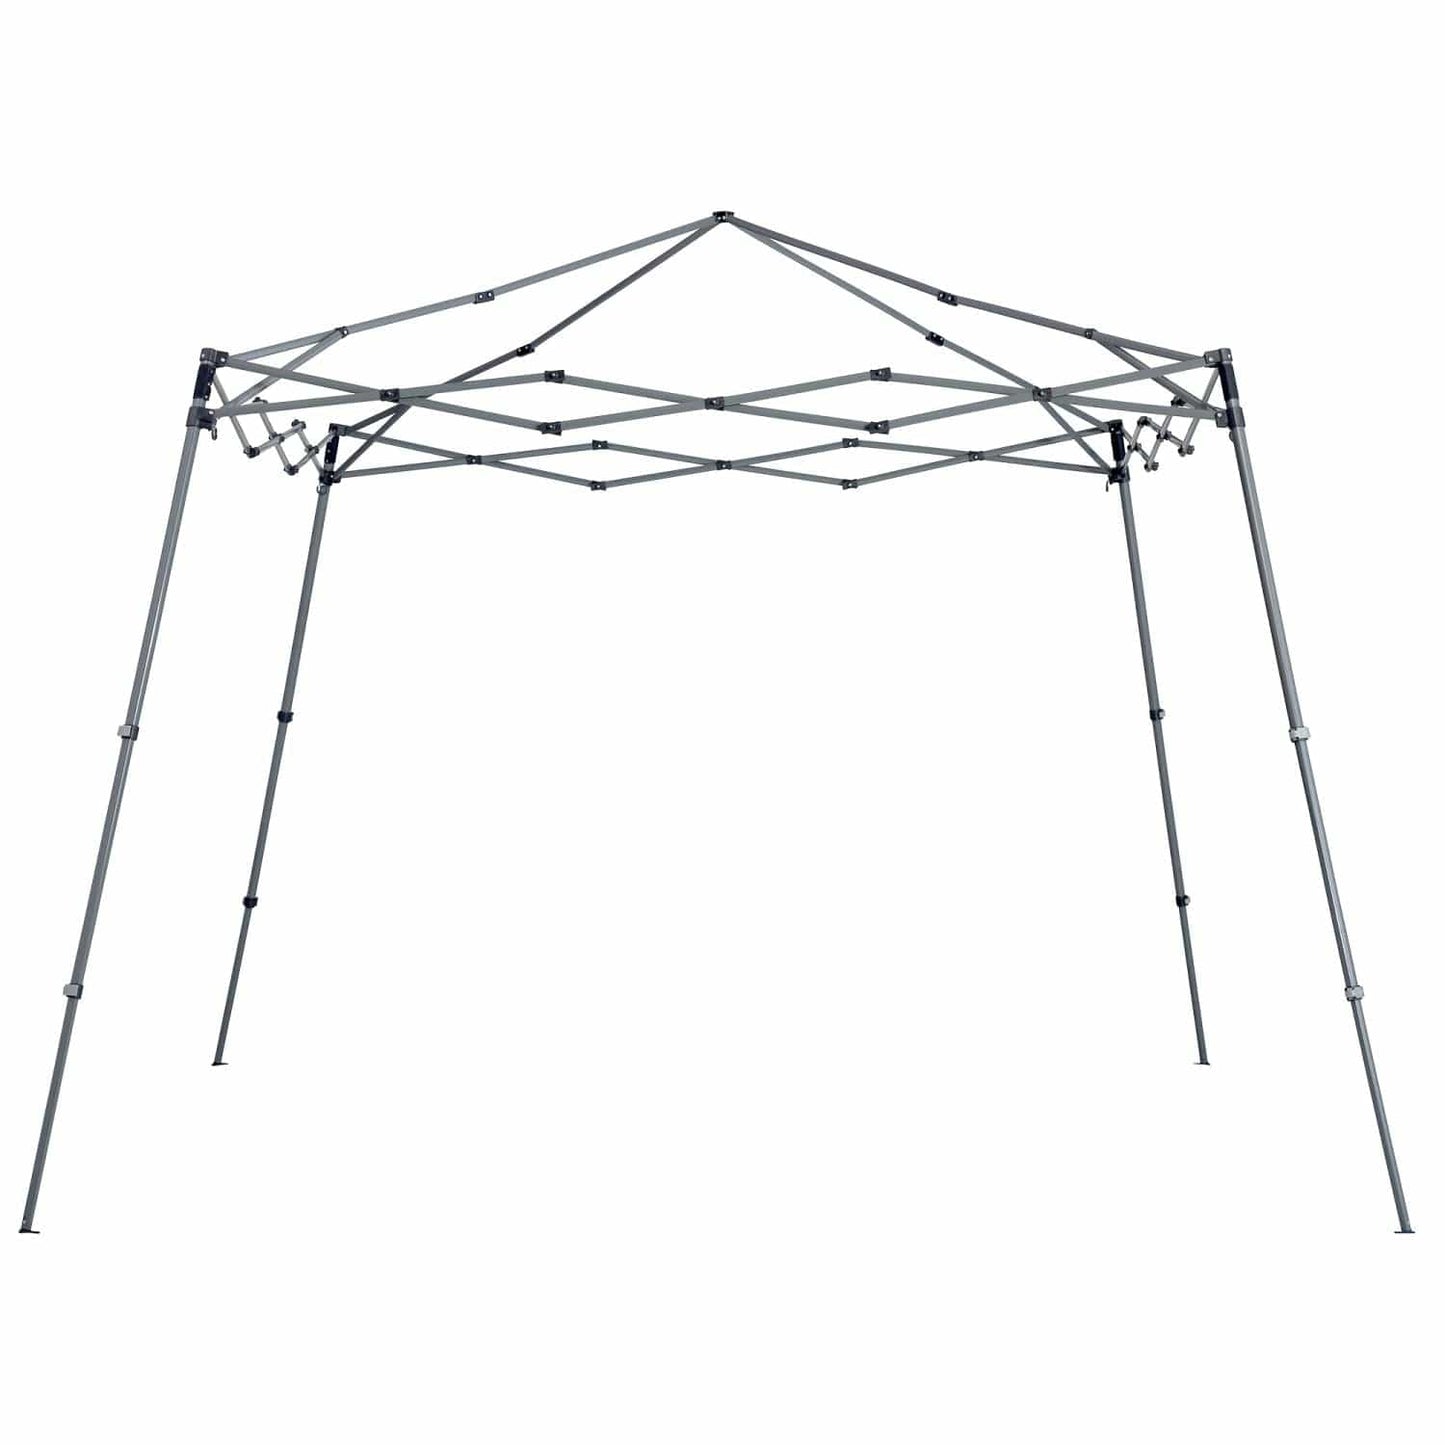 The Fulfiller Pop Up Canopies Quik Shade | Solo Steel 64 10' x 10' Slant Leg Canopy - Khaki 167540DS